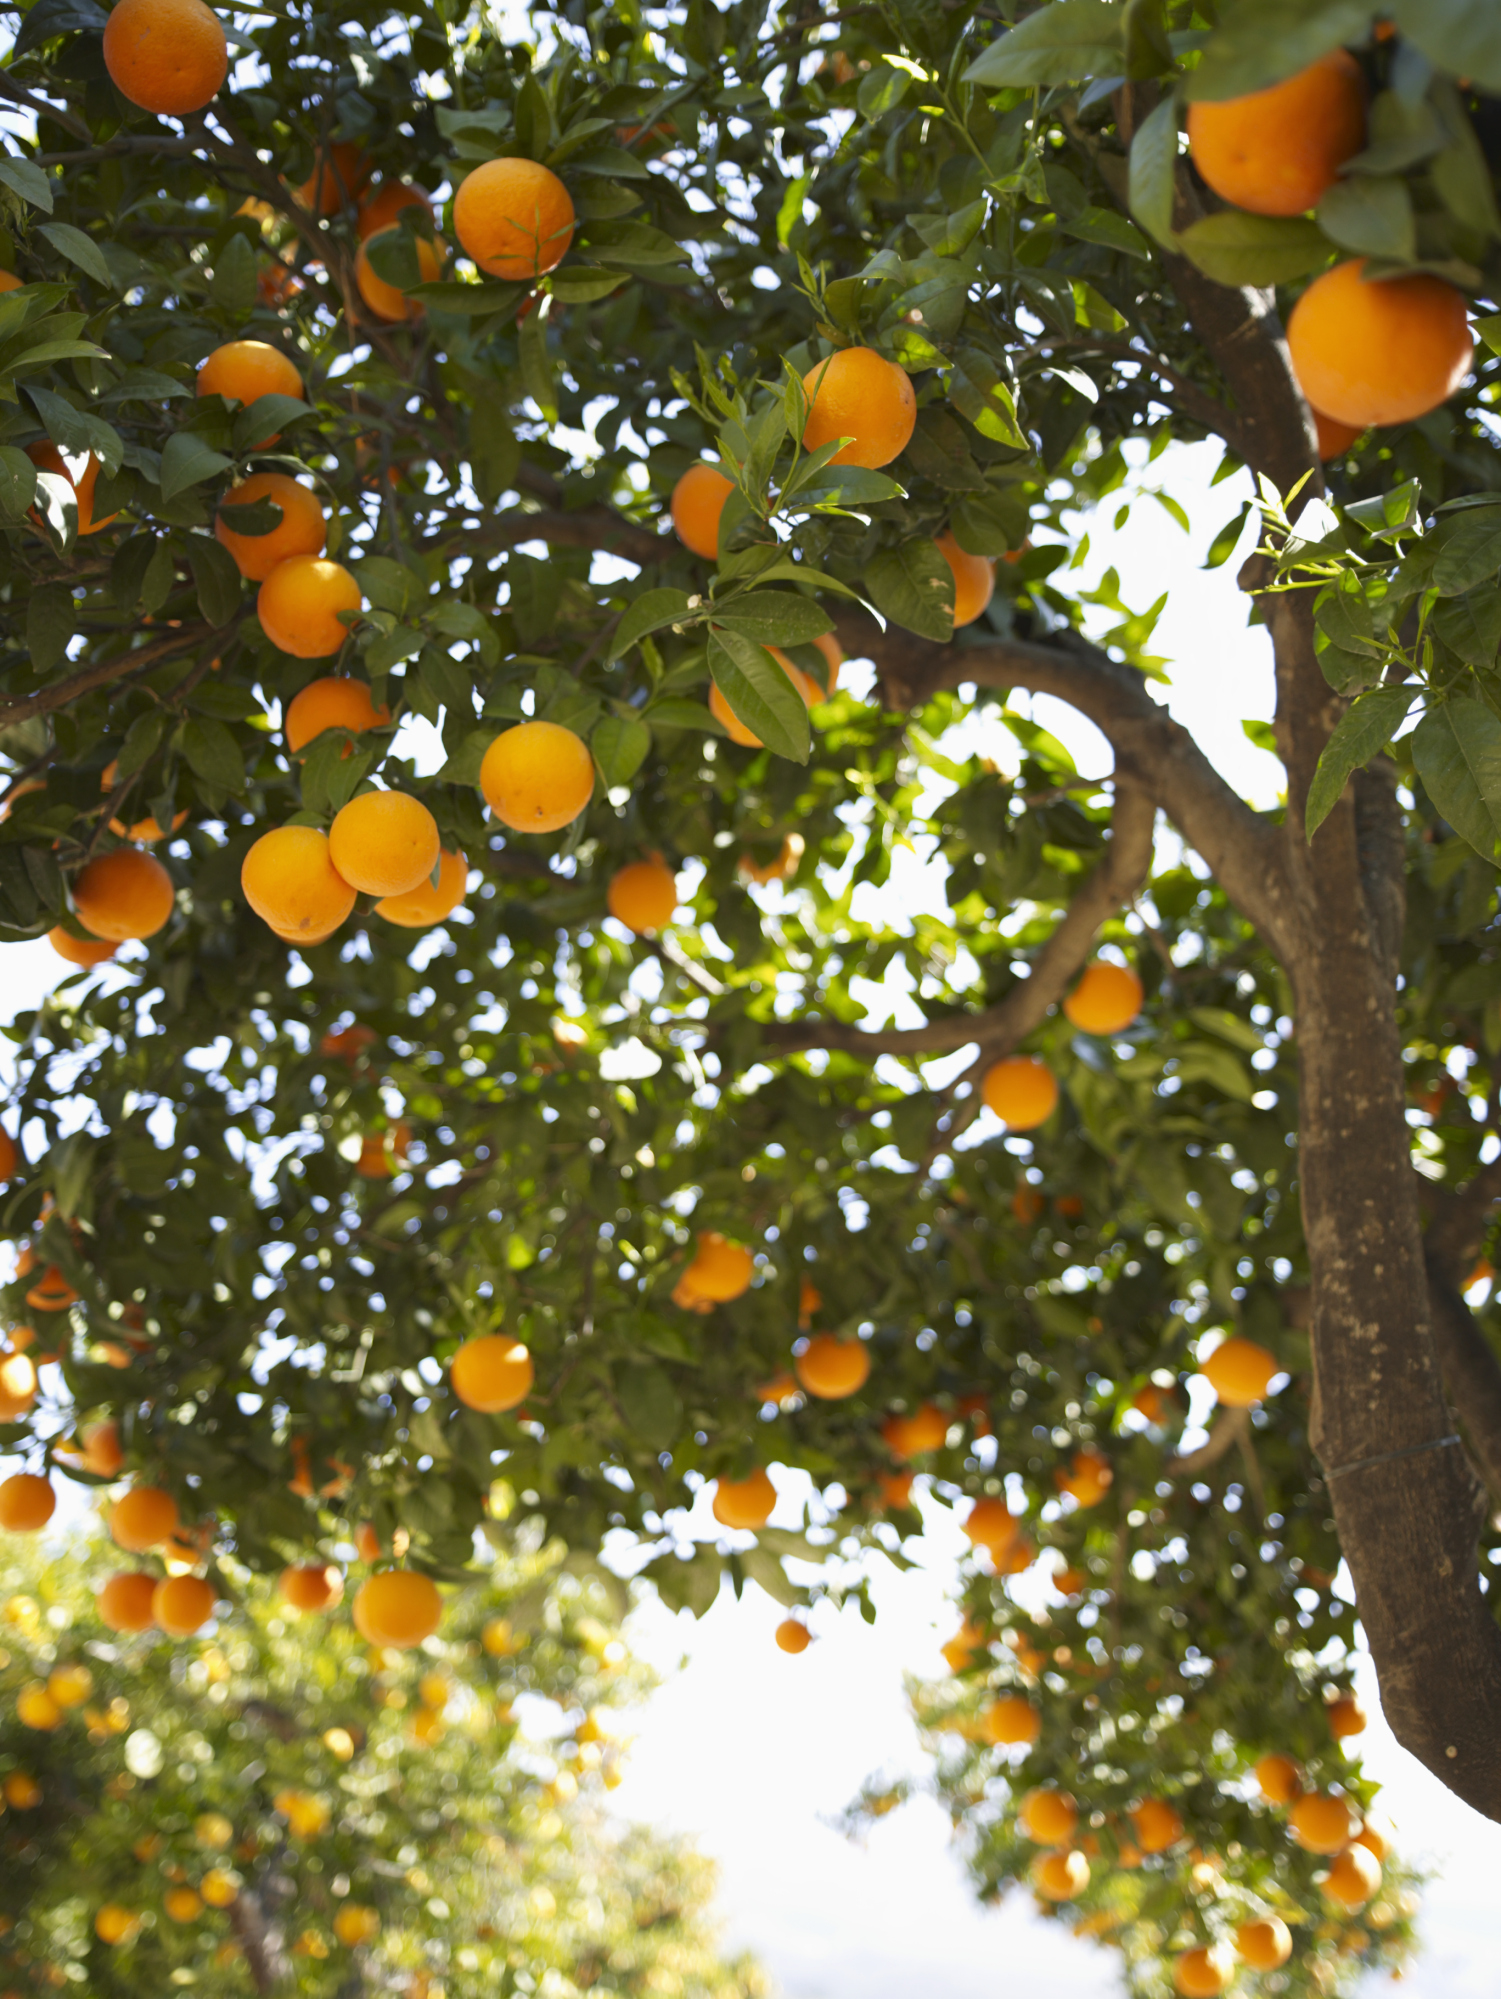 How to Water and Fertilize Orange Trees | Home Guides | SF Gate